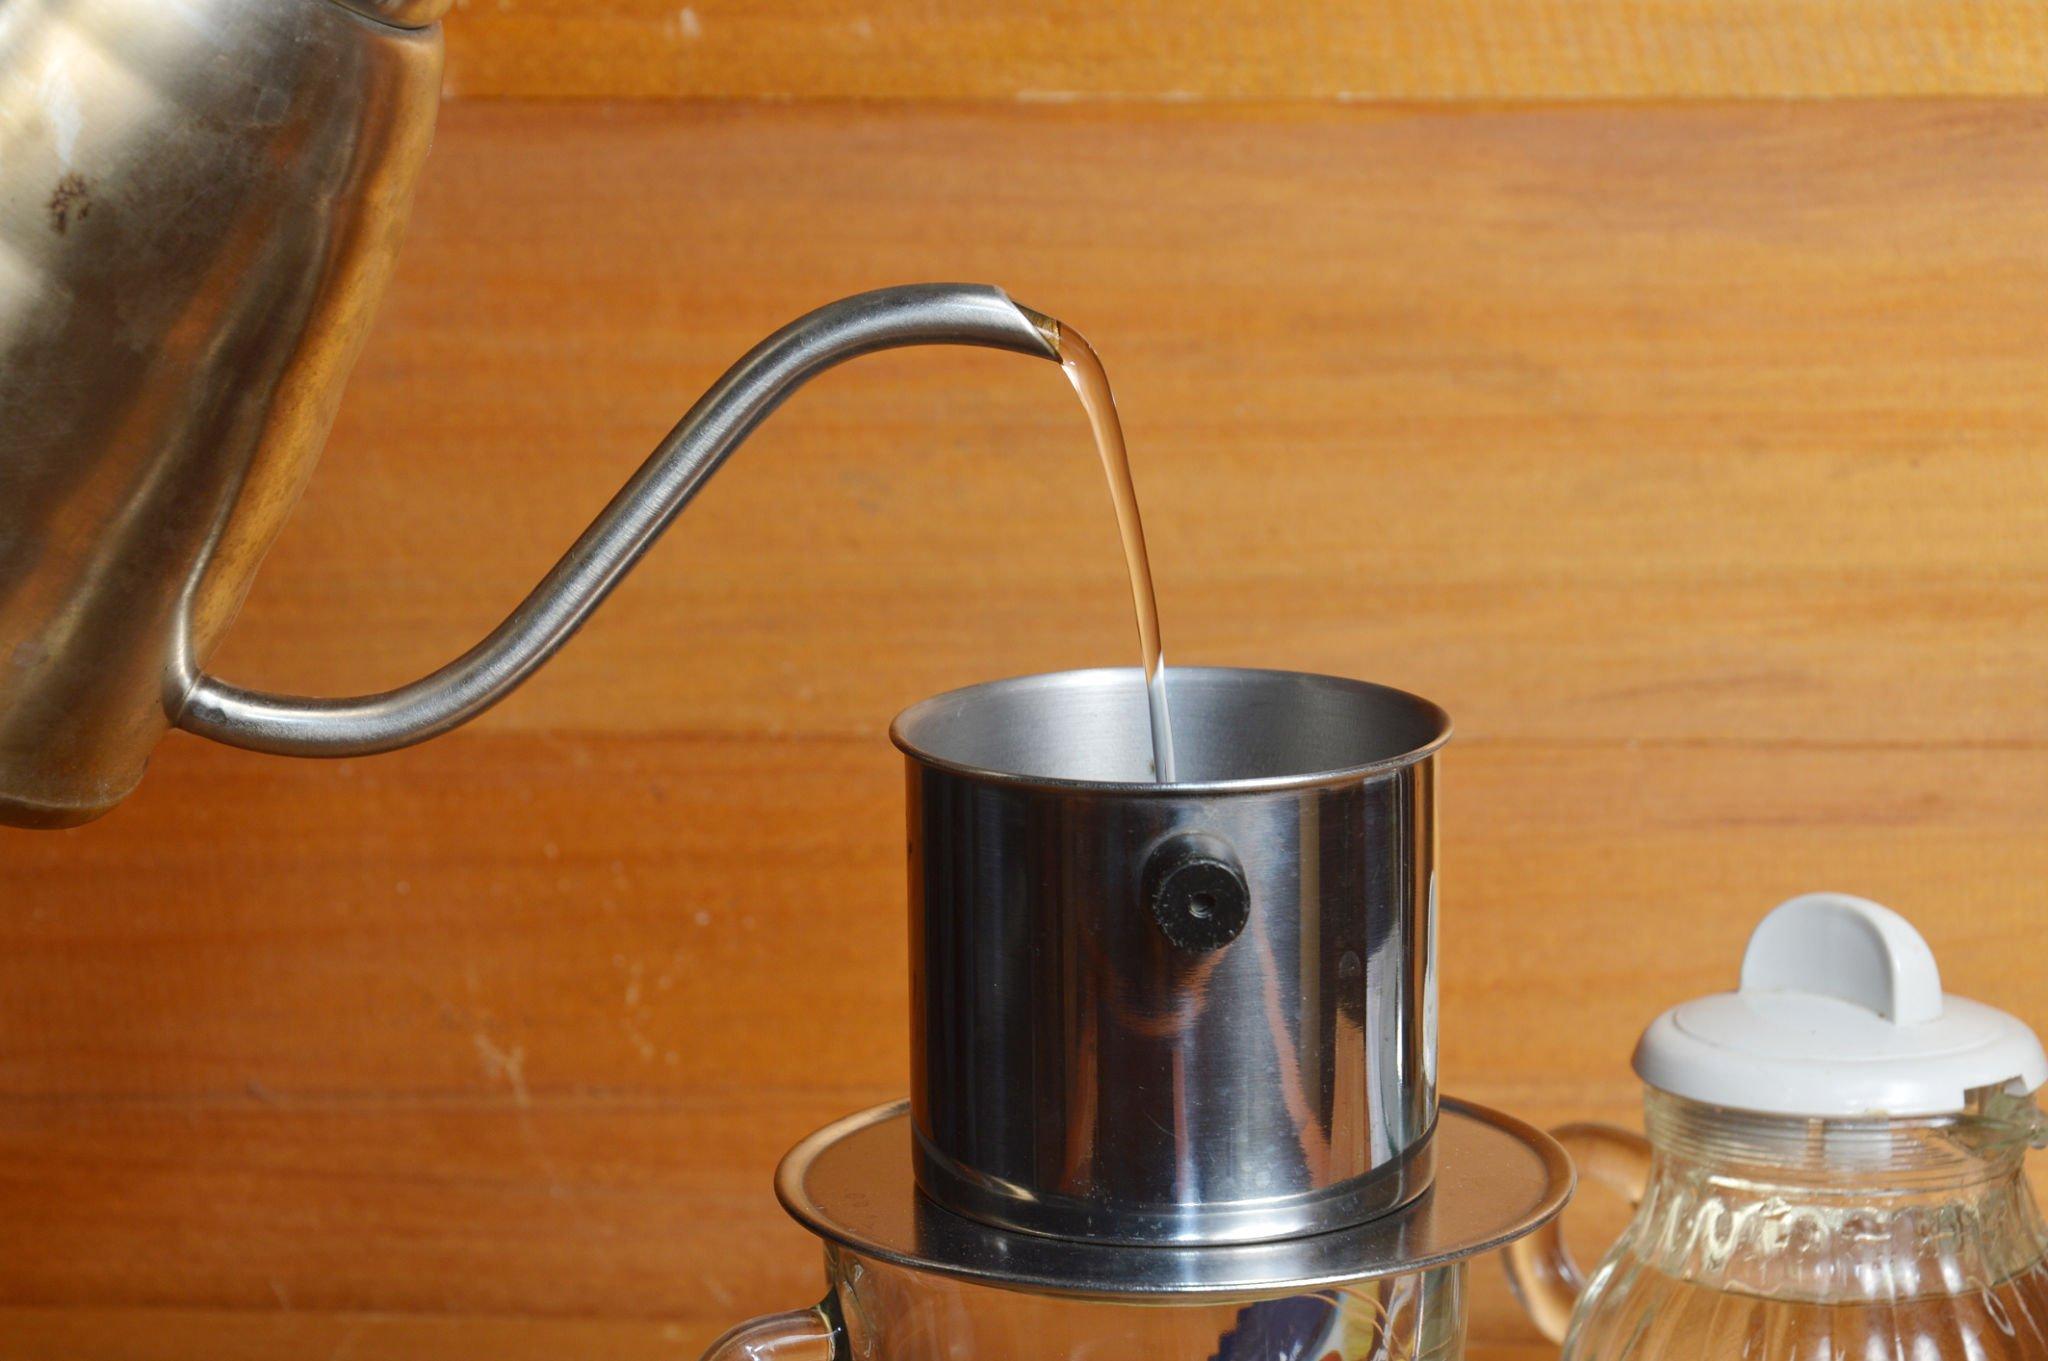 Clean Braun Coffee Maker: Step-by-step guide on how to clean your Braun coffee maker